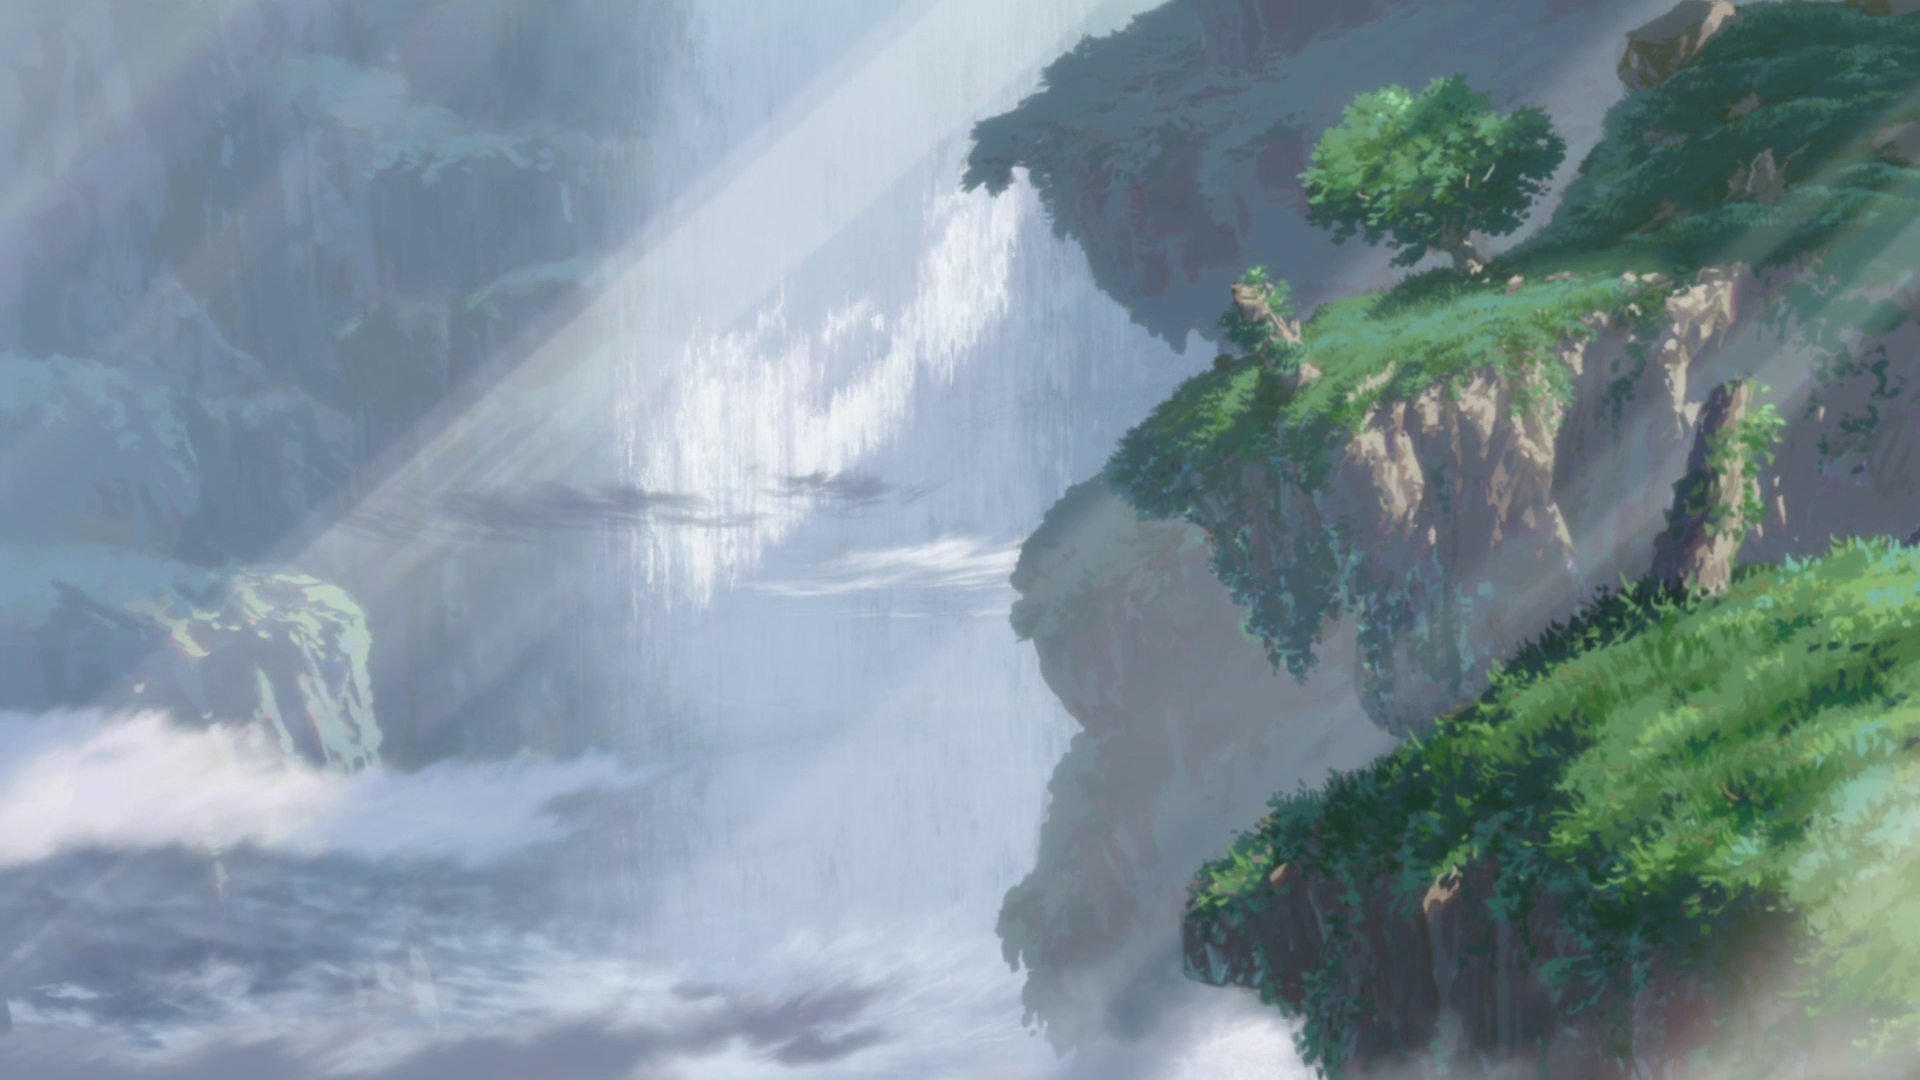 Download Made In Abyss 4K HD Wallpaper Photo Gallery Free Download Wallpaper  